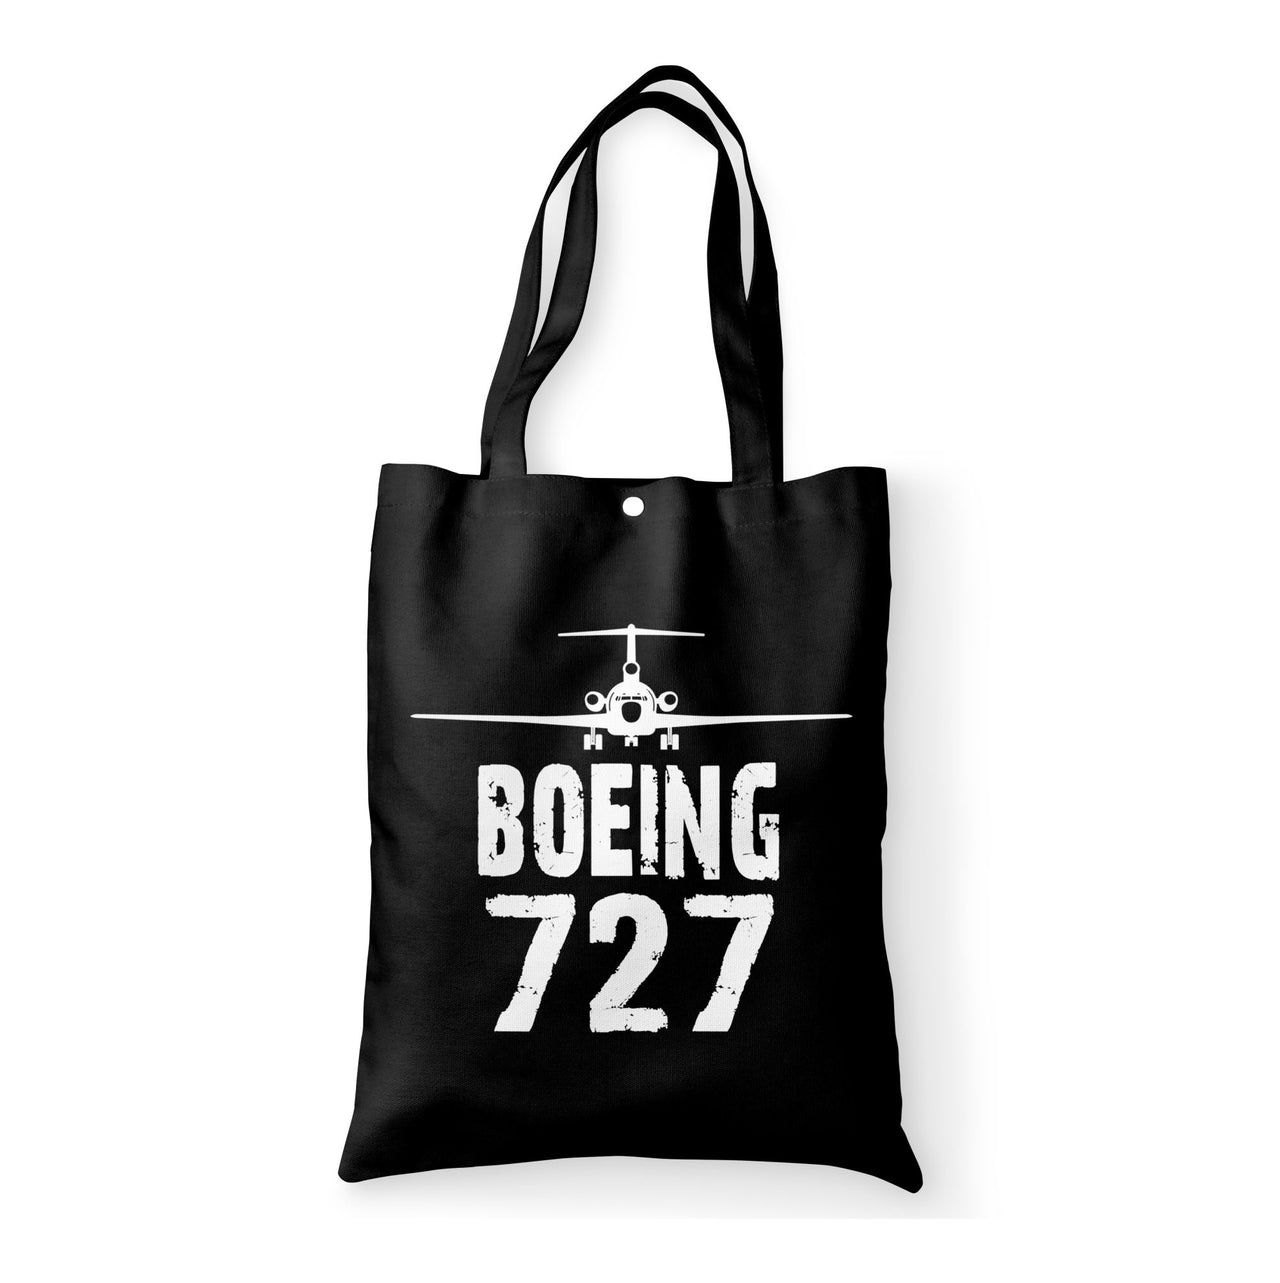 Boeing 727 & Plane Designed Tote Bags